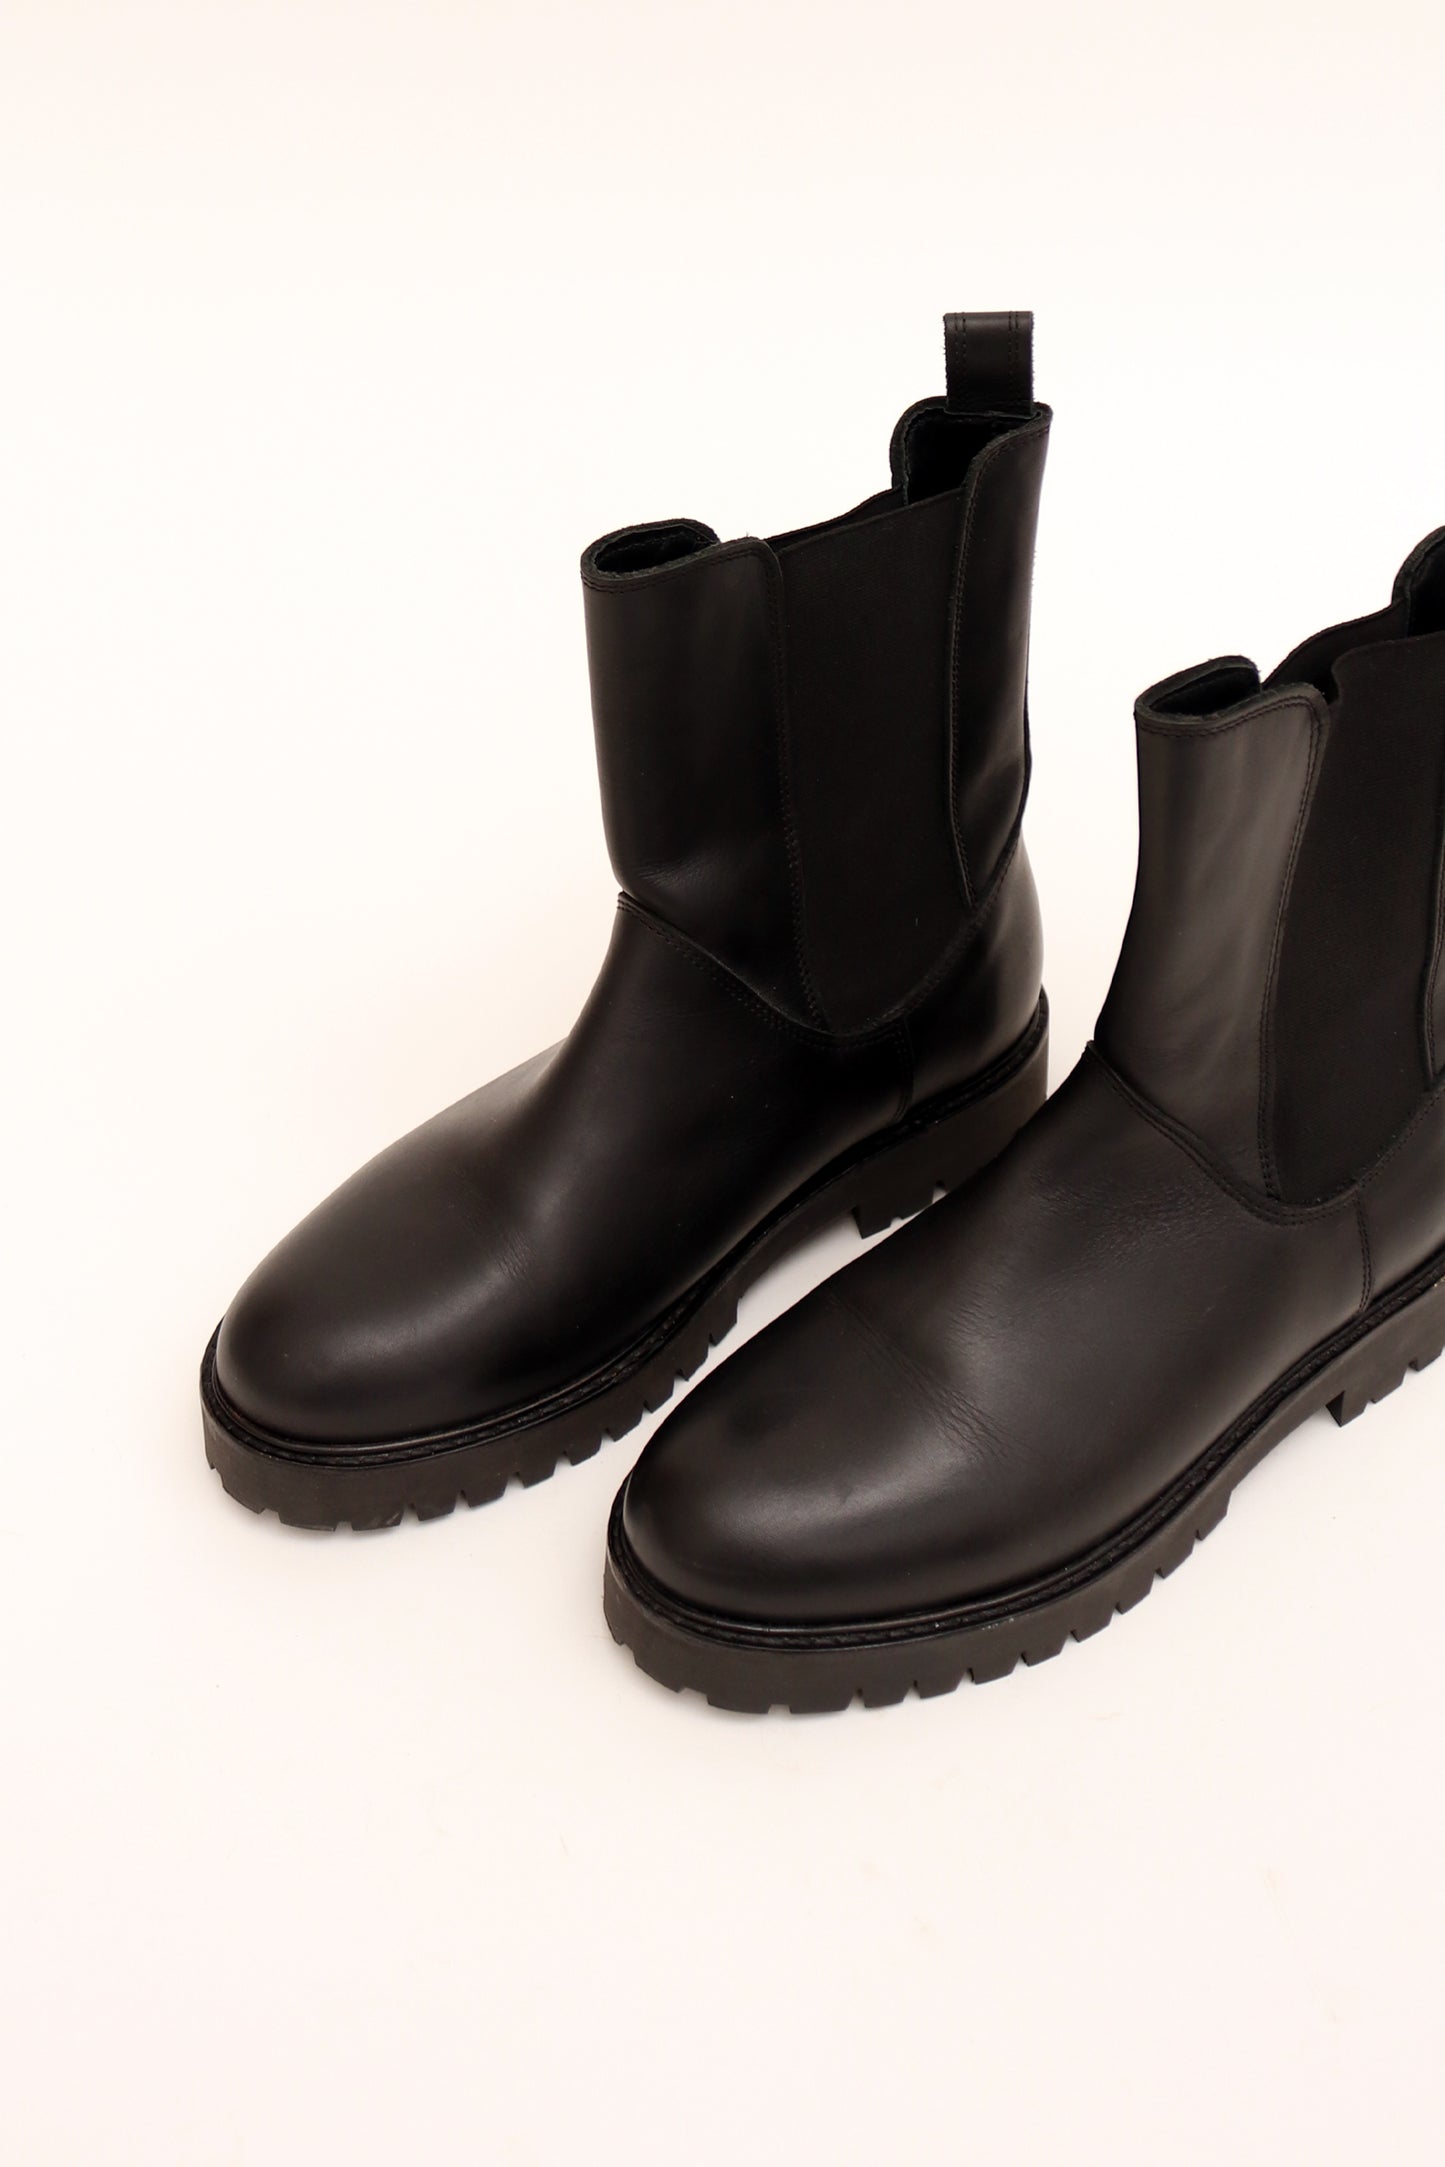 COS High Leather Chelsea Boots